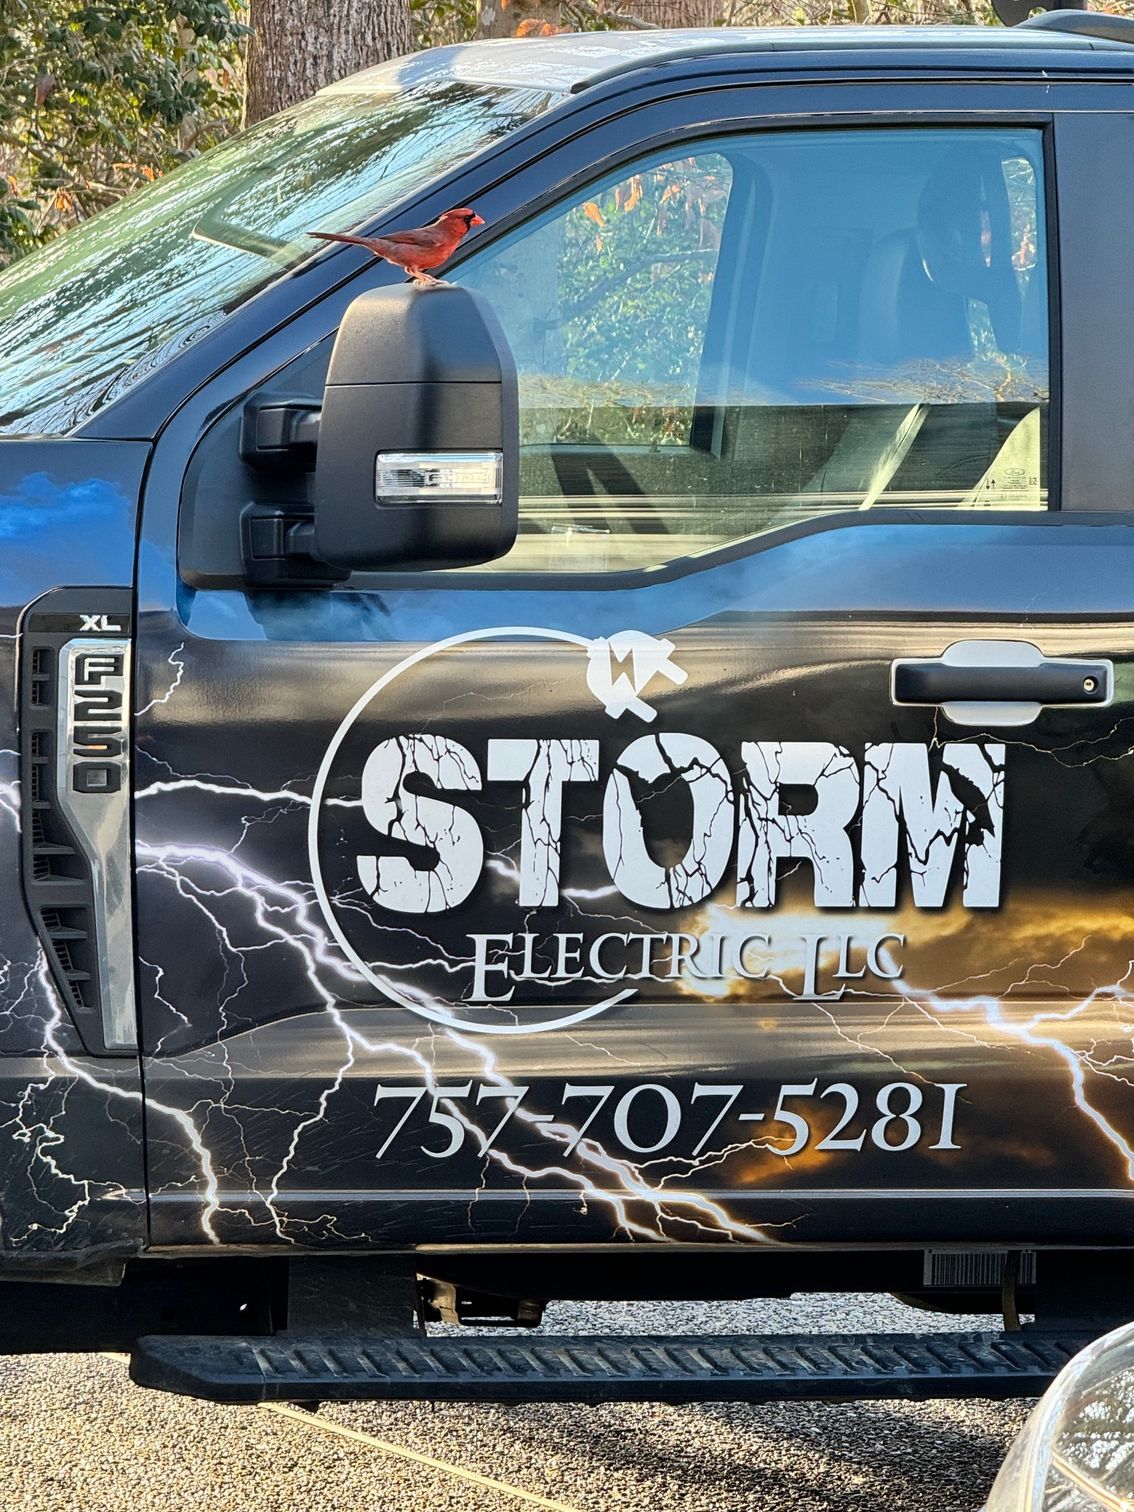 A storm electric truck is parked in a parking lot.